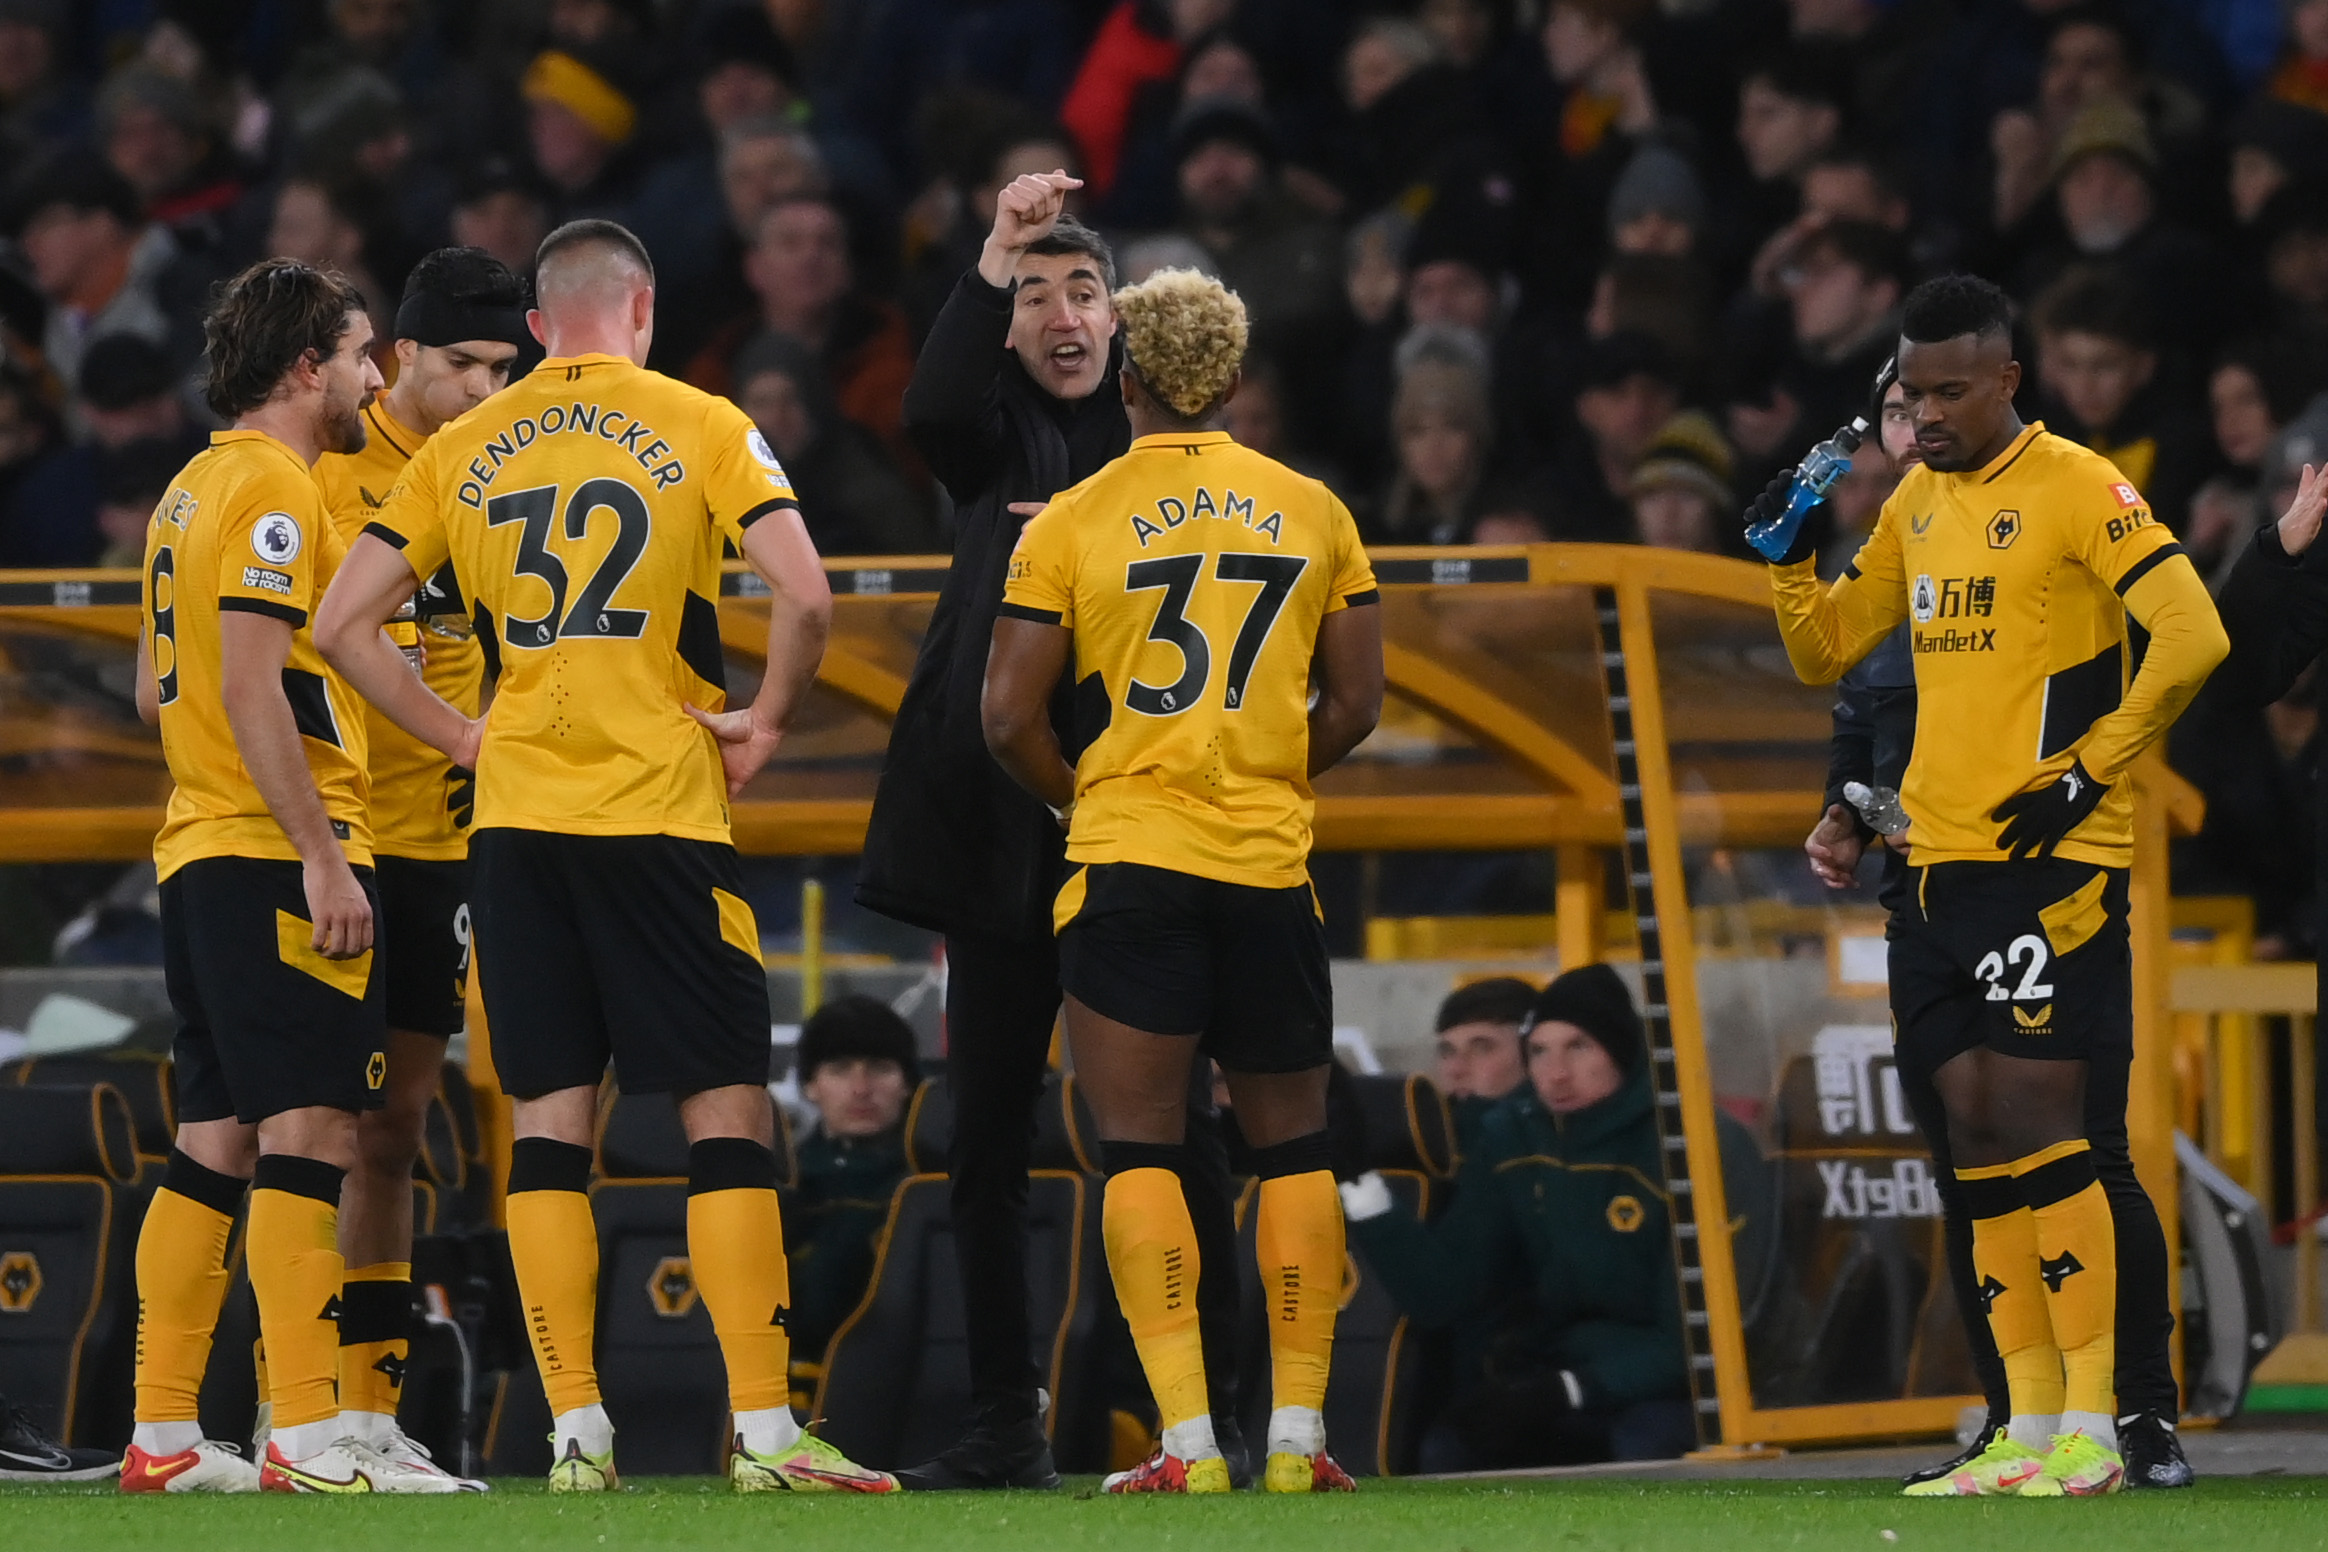 ‘I think we did that’ – Wolves boss Bruno Lage pleased with his side’s performance despite late Origi Liverpool winner